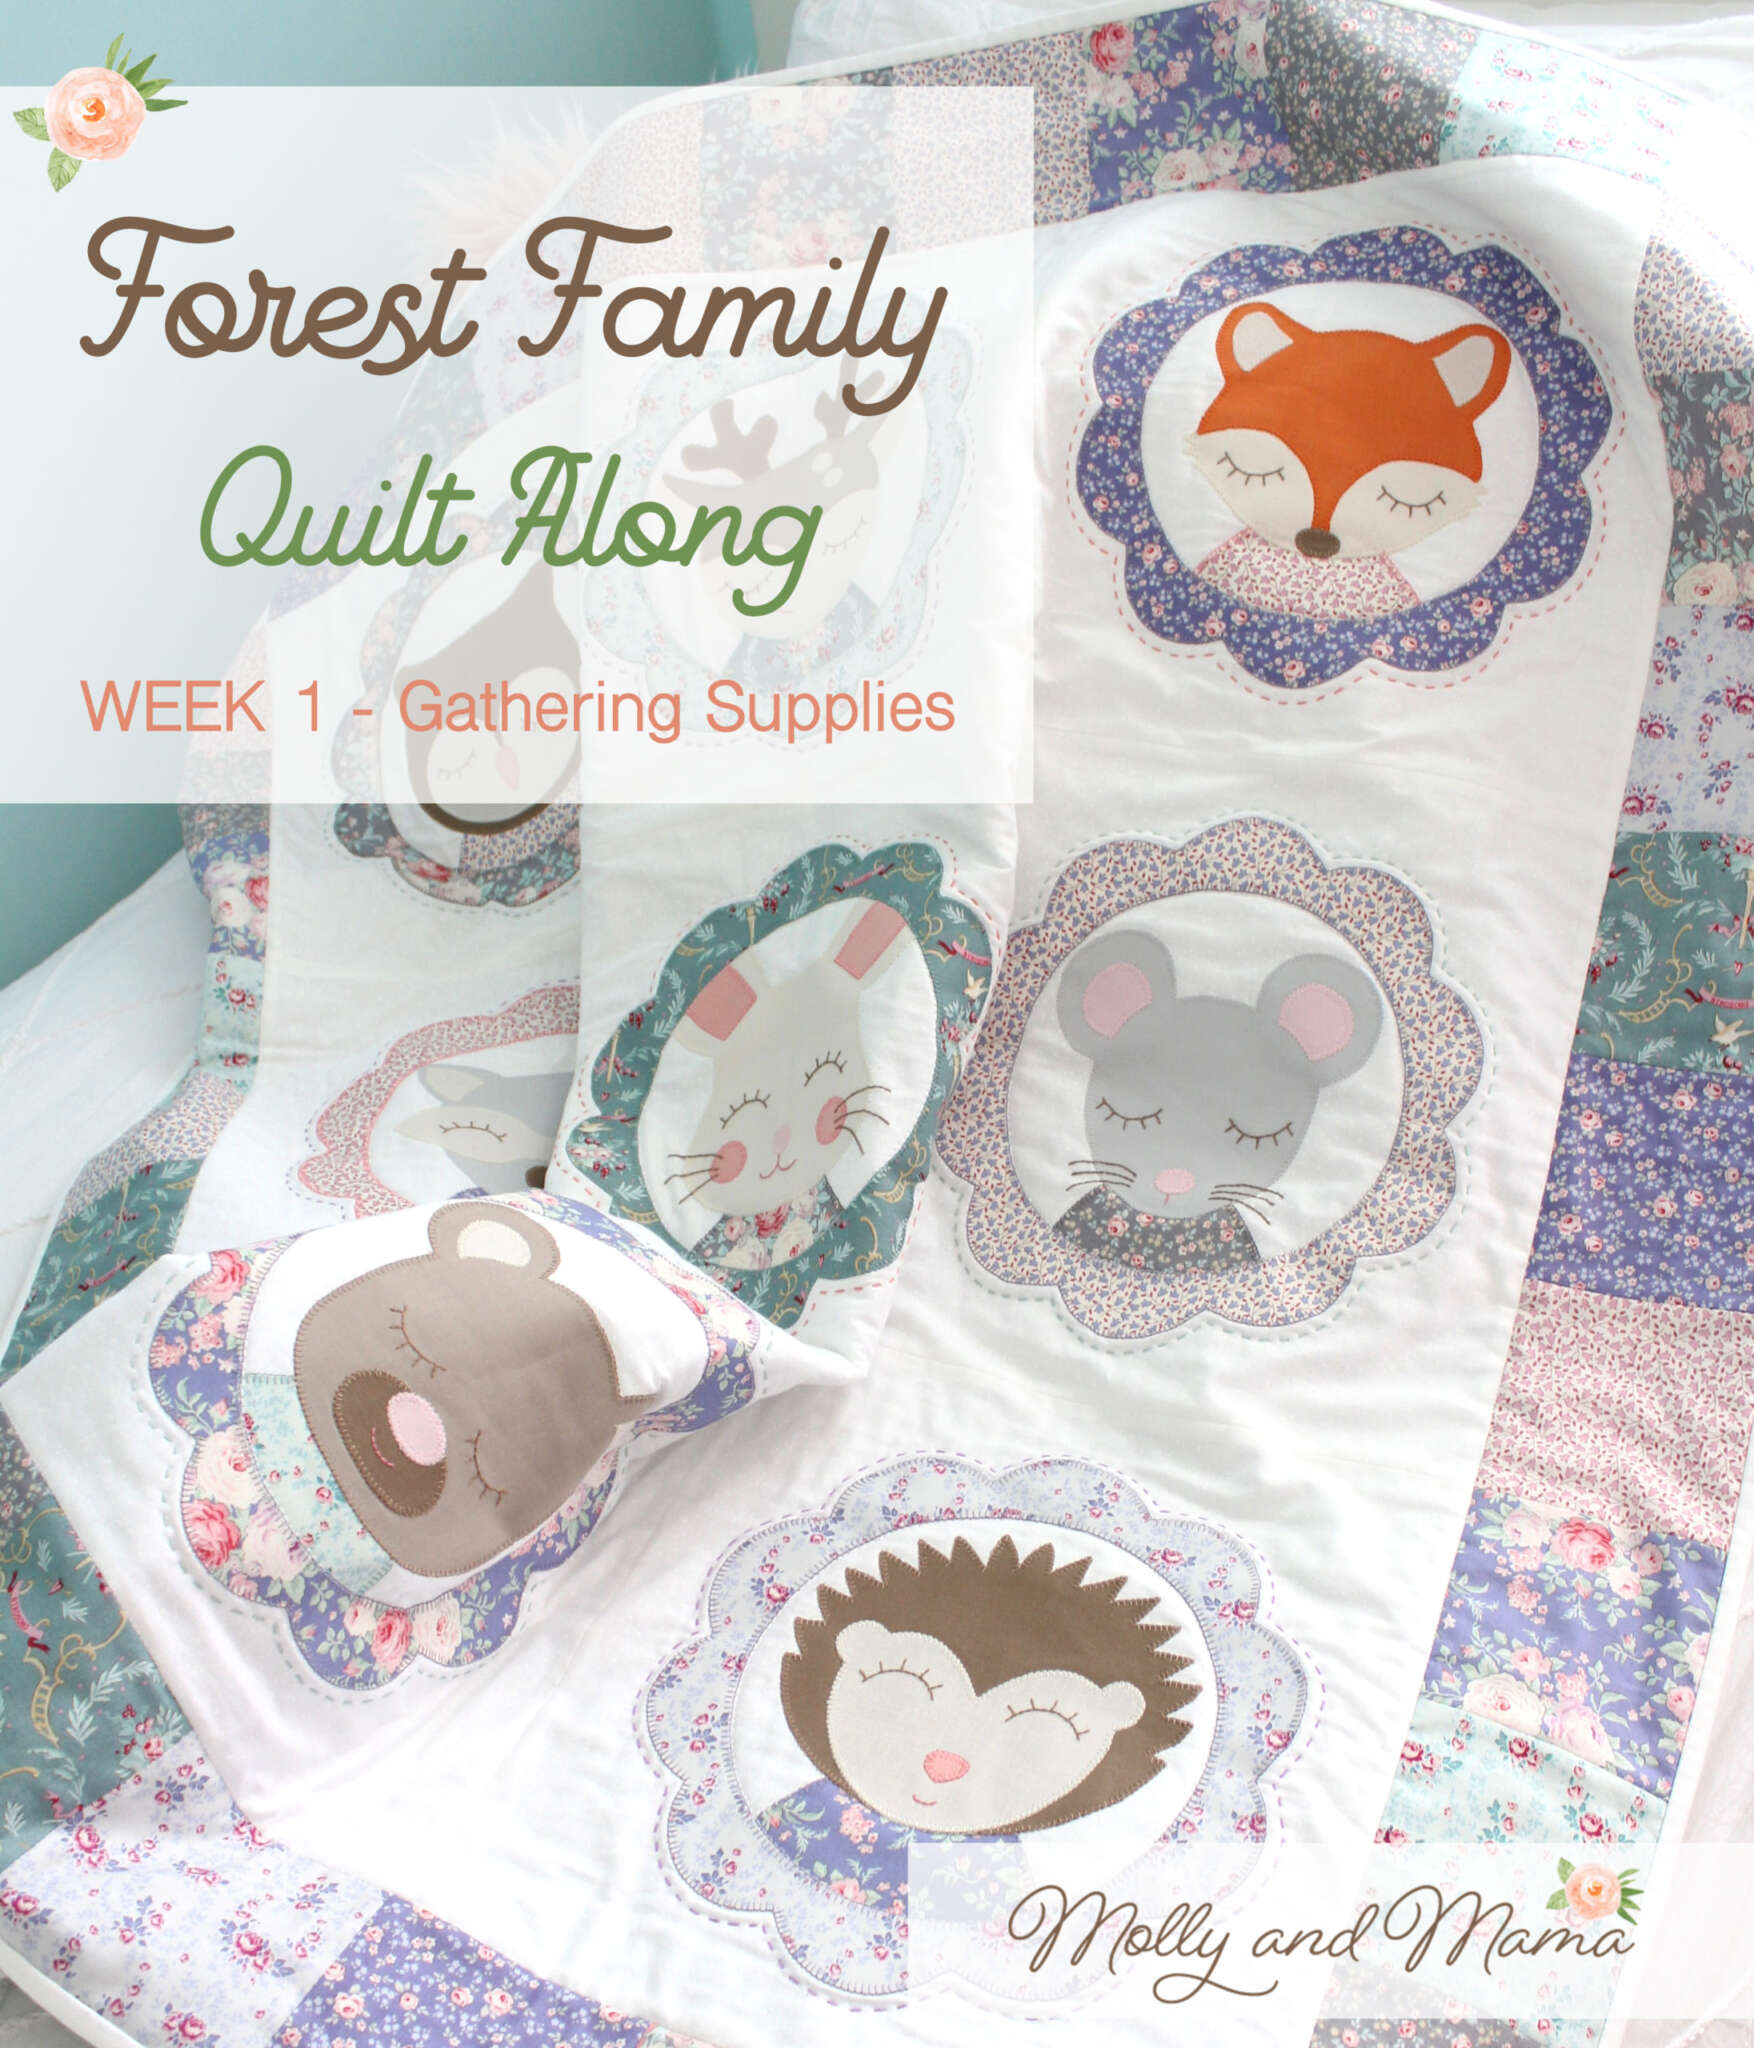 Week 1 – Forest Family Quilt Along